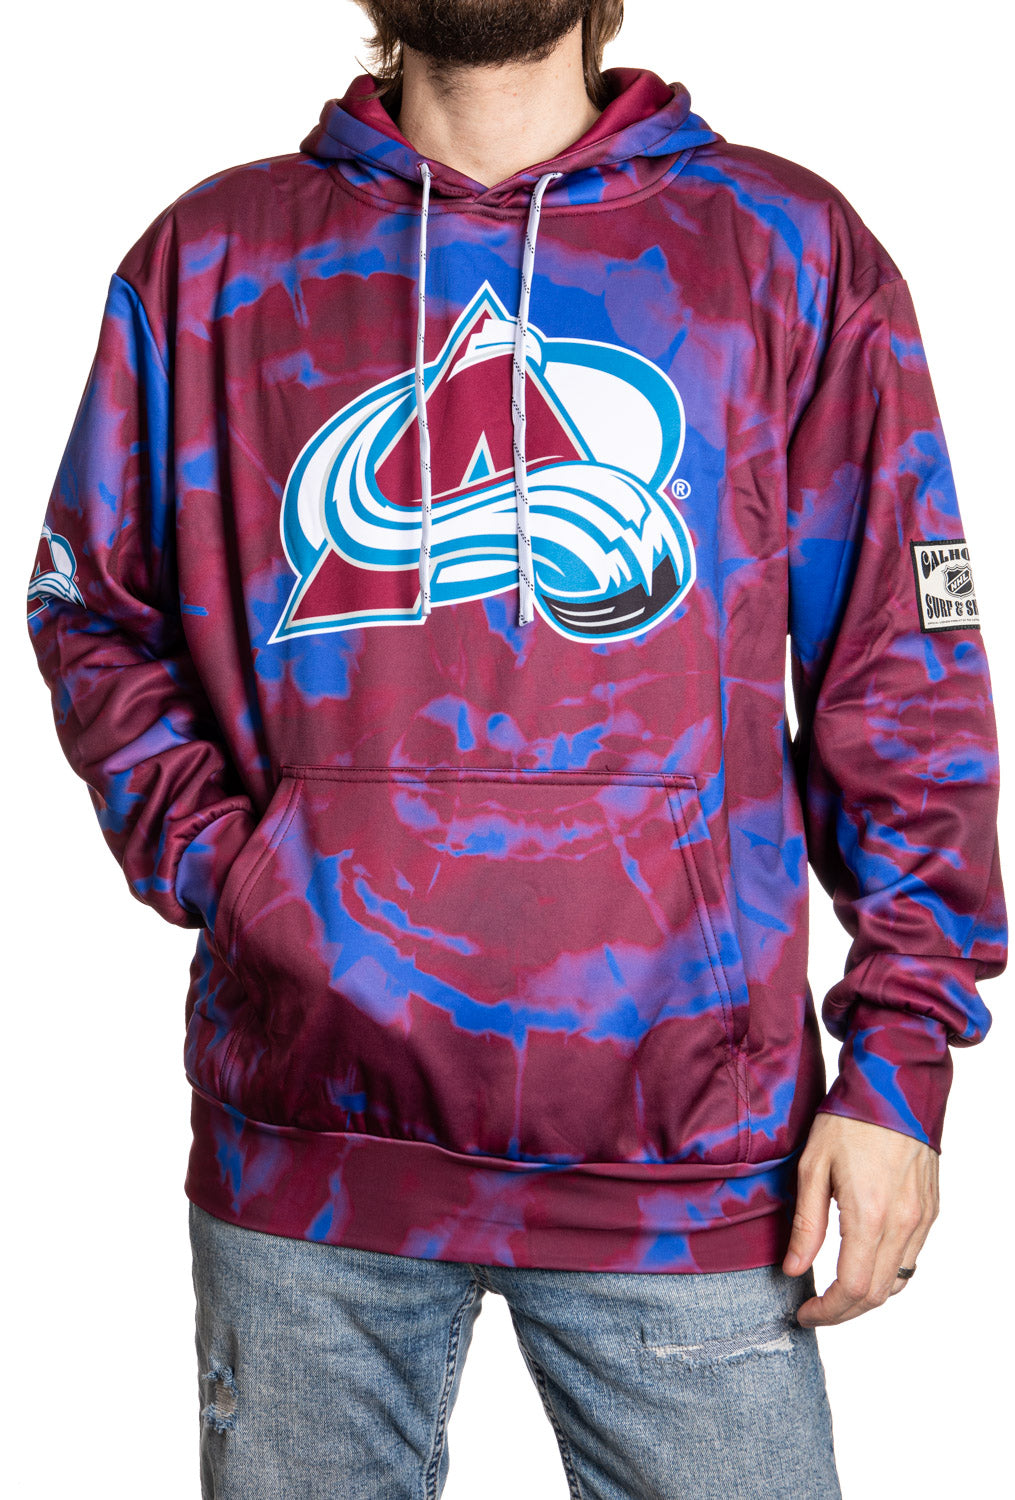 Avalanche Skate Lace Hoodie